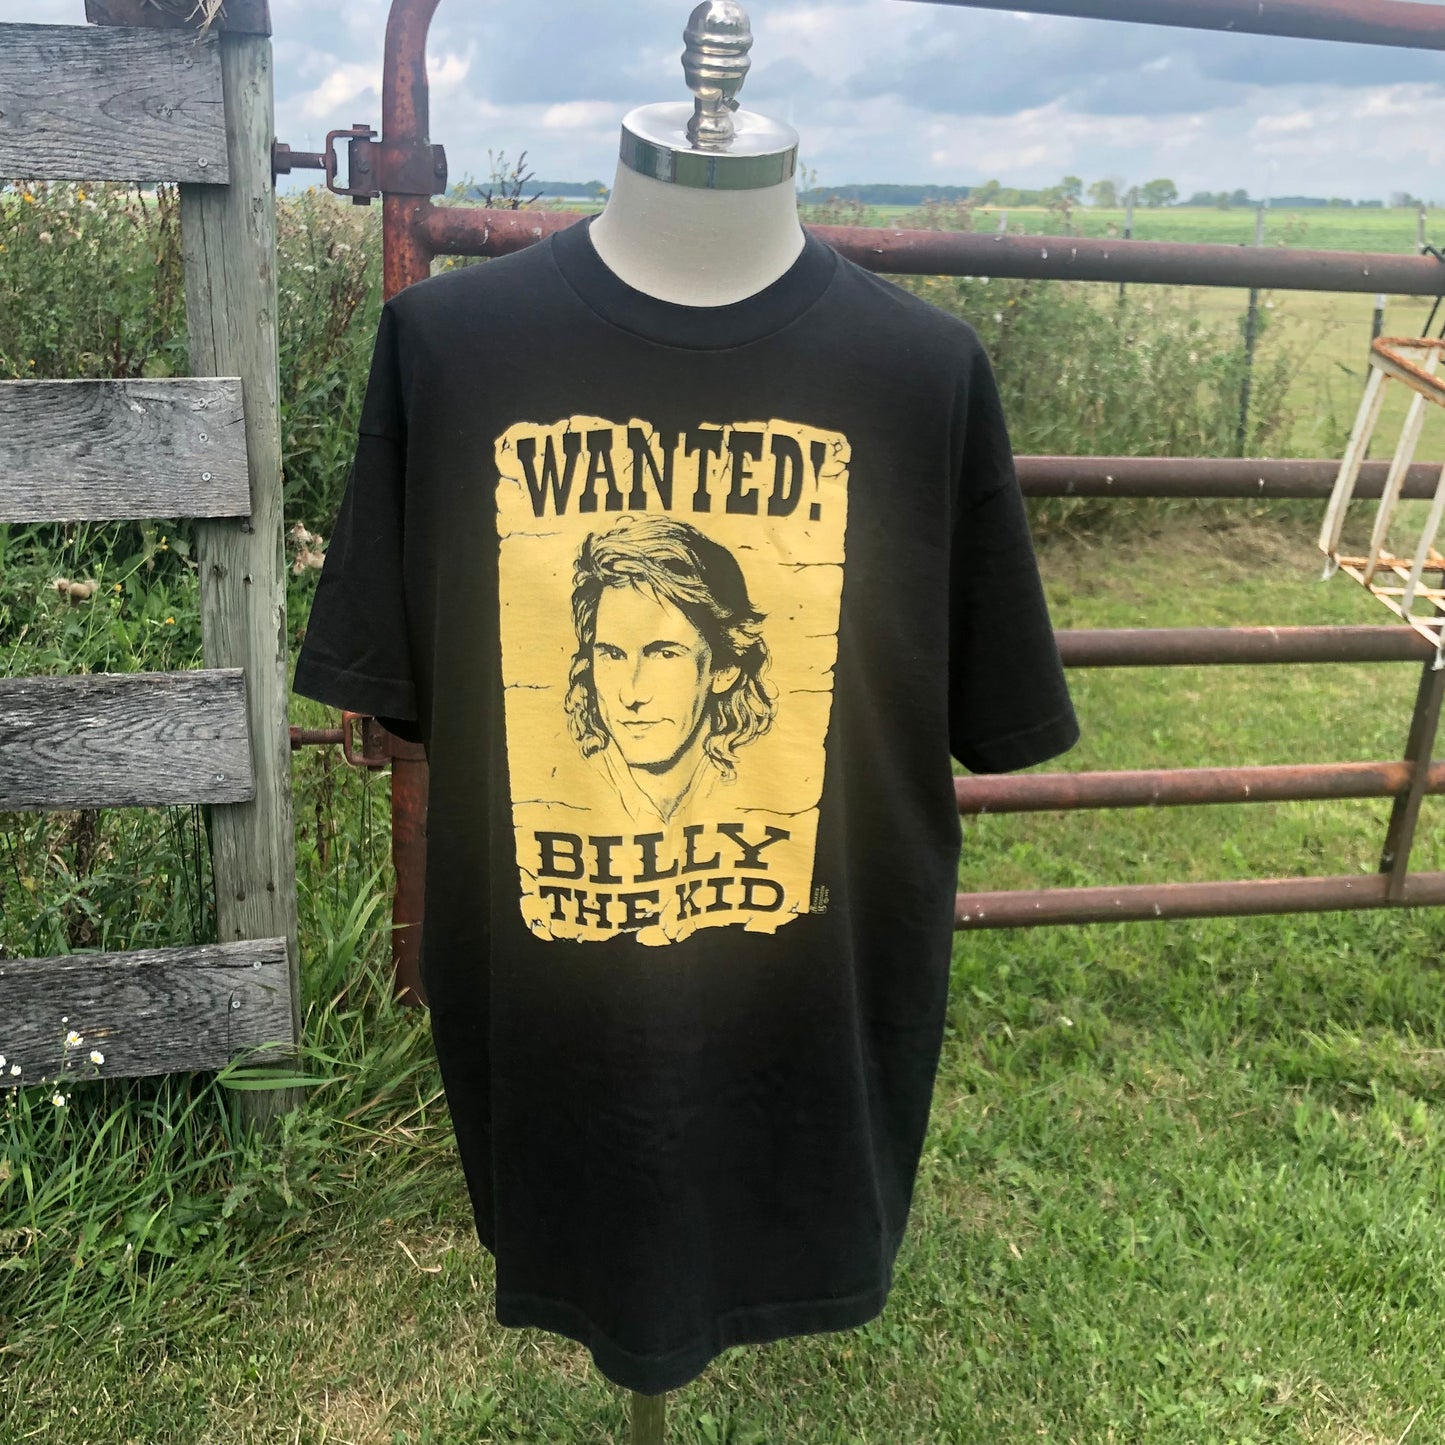 1992 Vintage Western Billy Dean Country Concert T-Shirt | Billy The Kid